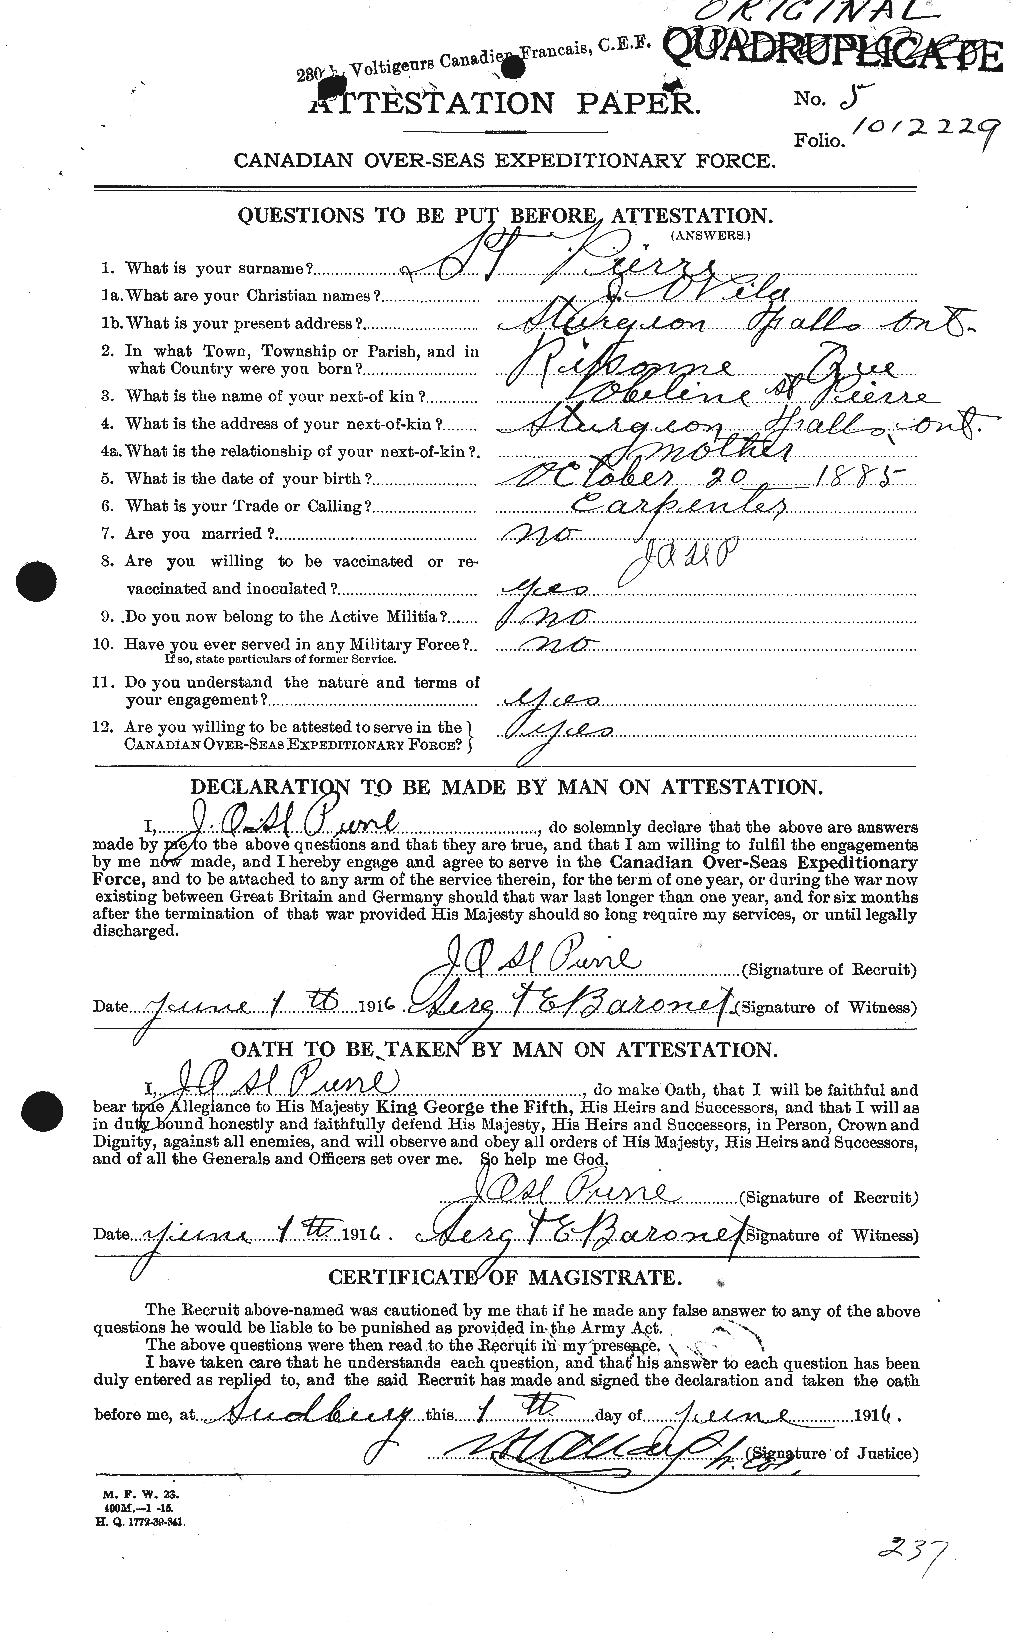 Personnel Records of the First World War - CEF 077580a